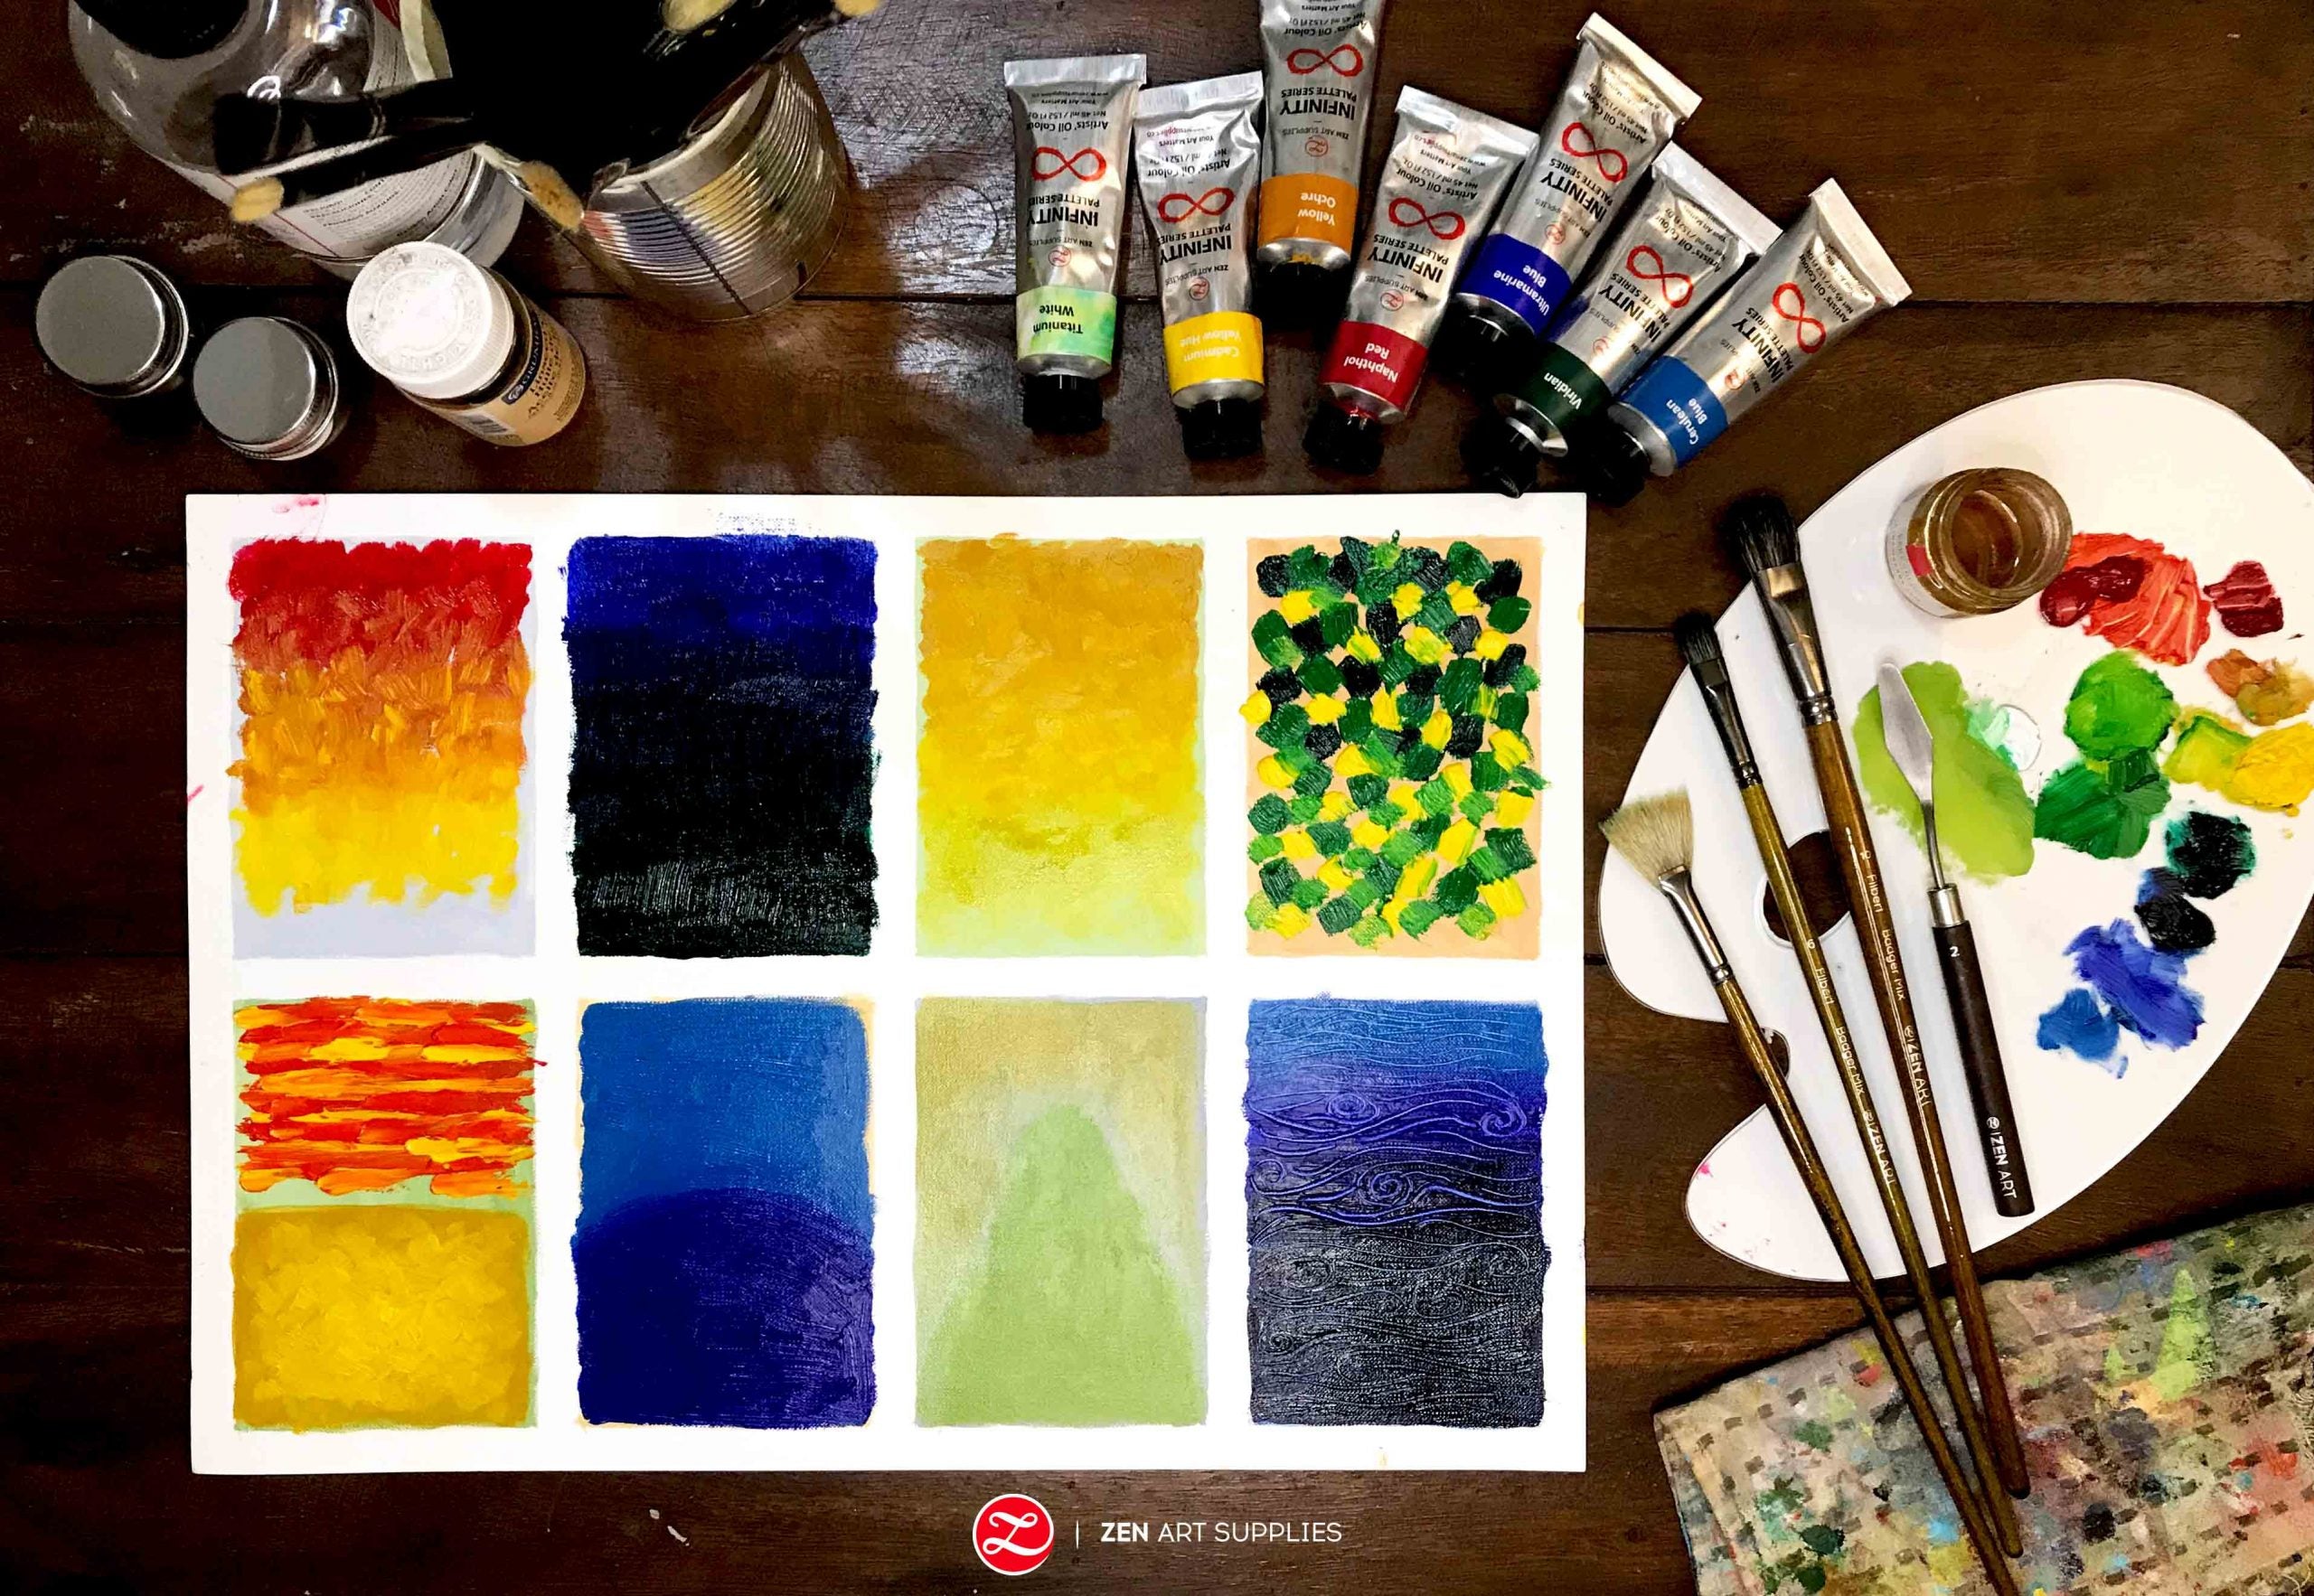 Best watercolour brush stroke - simple exercises to master your brush 